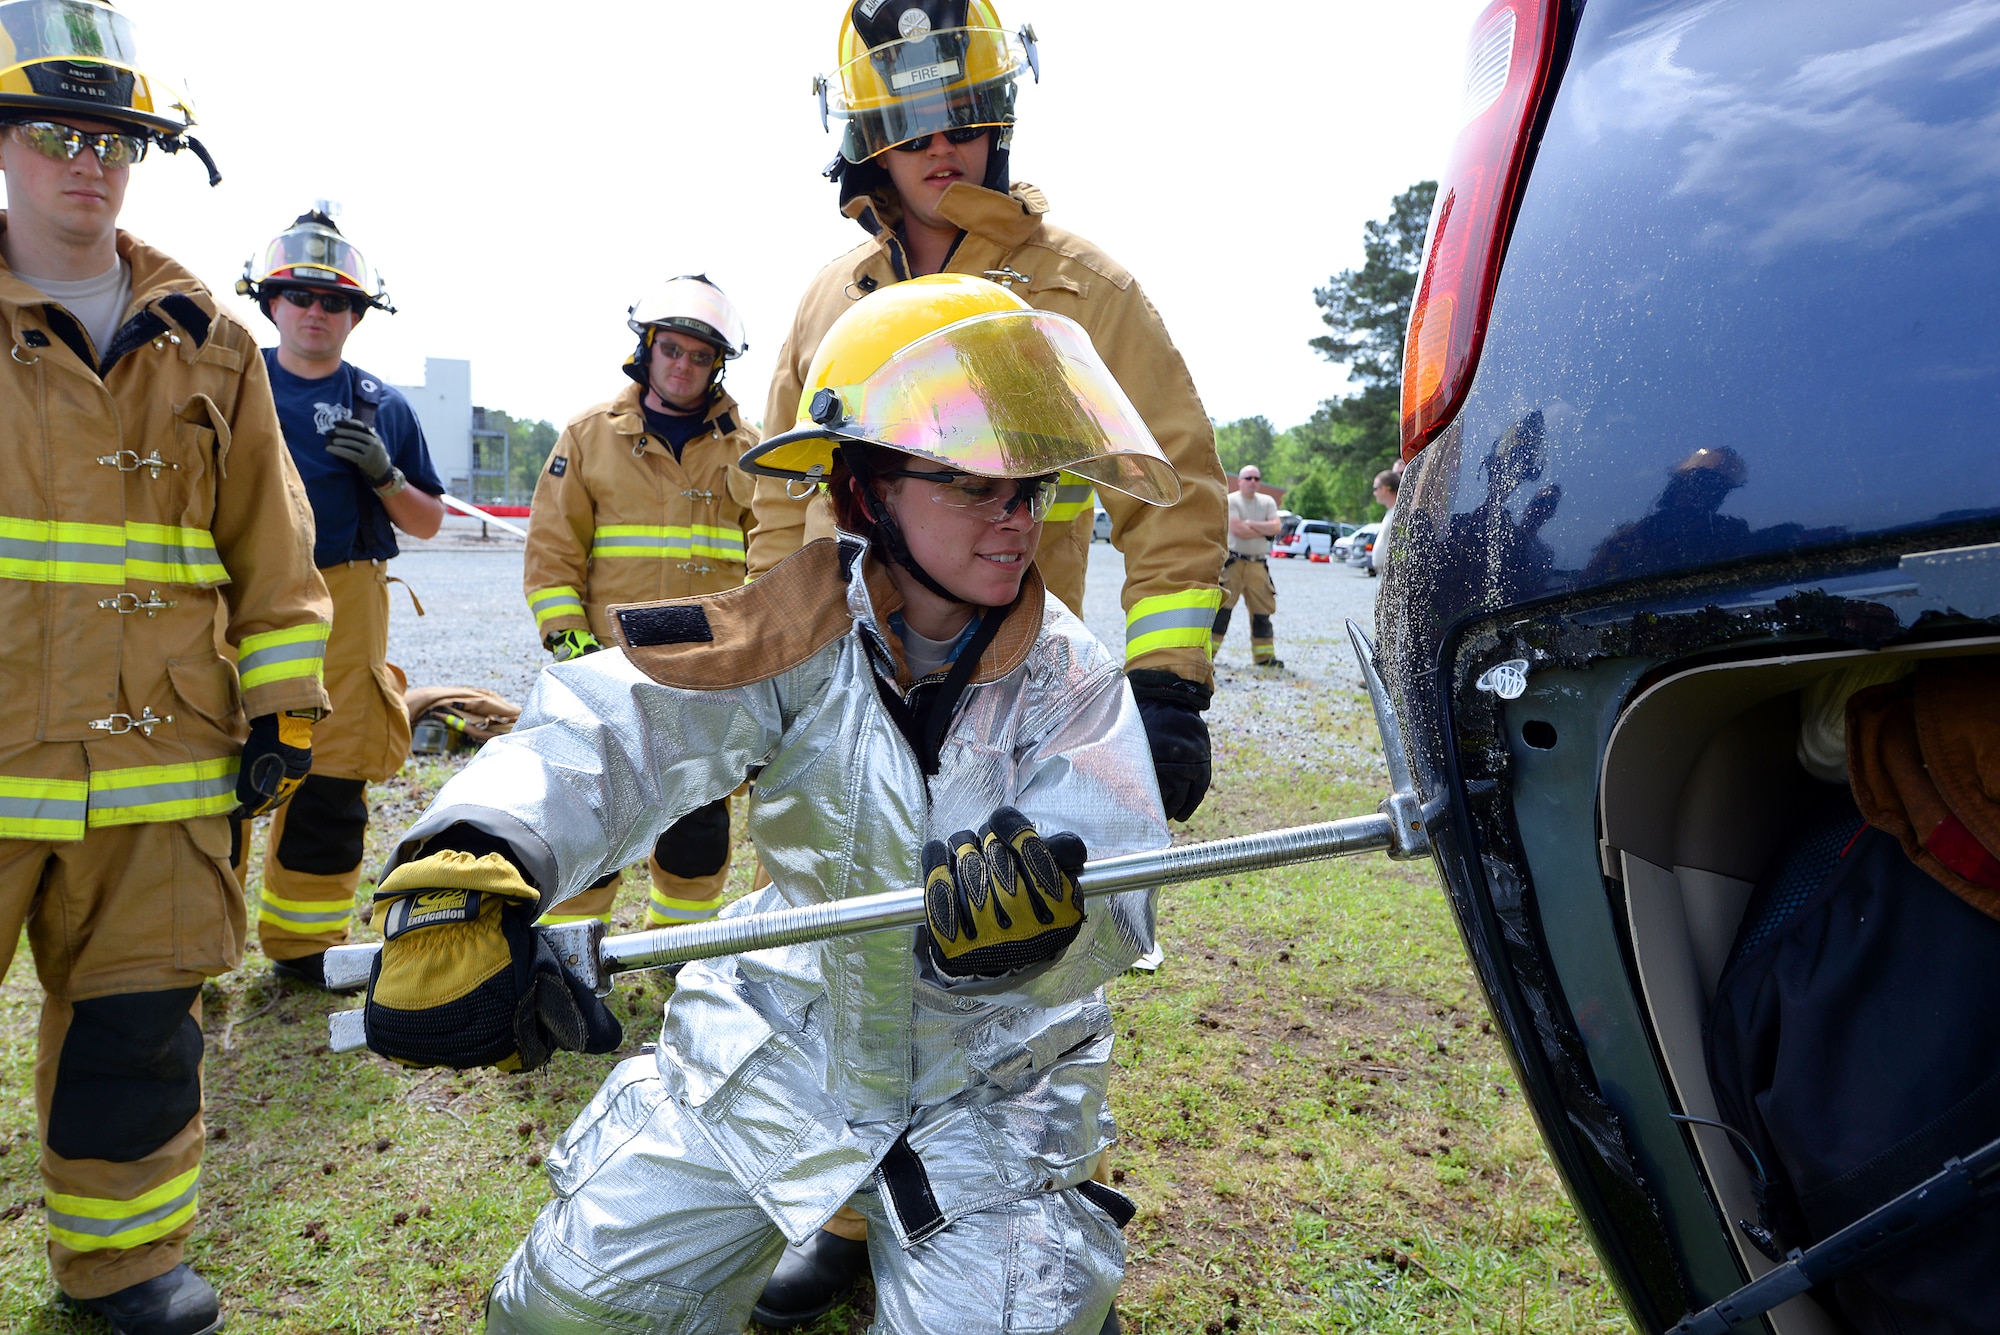 A picture of Airman 1st Class Brooke Hunt of the 177th Fighter Wing Fire Department, New Jersey Air National Guard, utilizing a halligan tool to soften a vehicle.